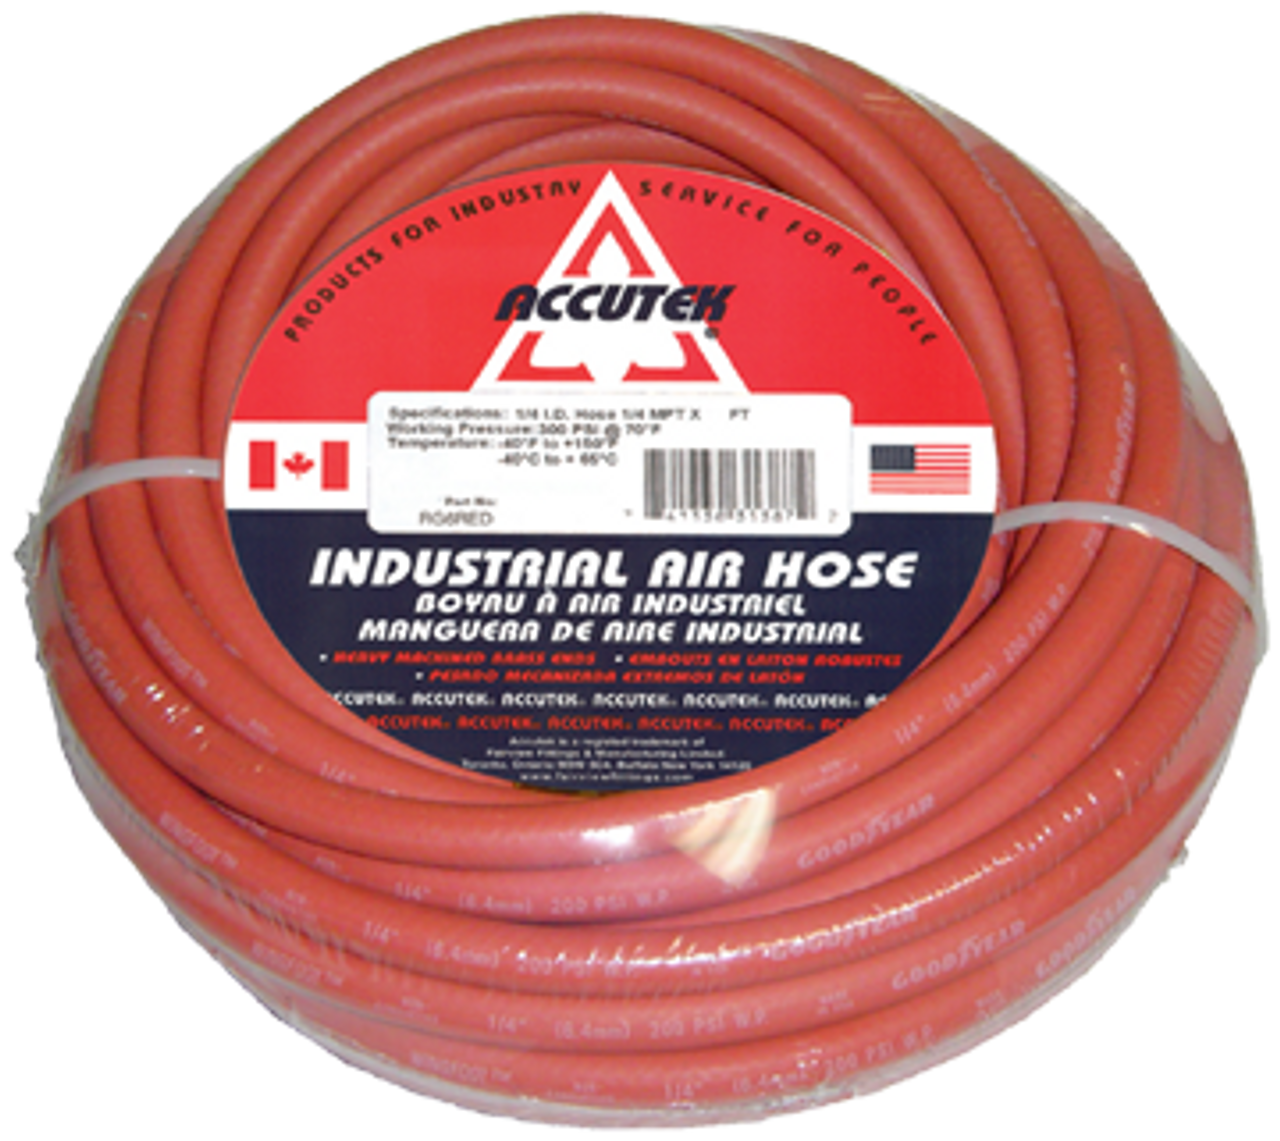 1/2 x 1/2" x 25' Red PVC/Nitrile 300 PSI Rubber Air Hose Assembly - Brass Male NPT Ends  RW8/2RED-25D